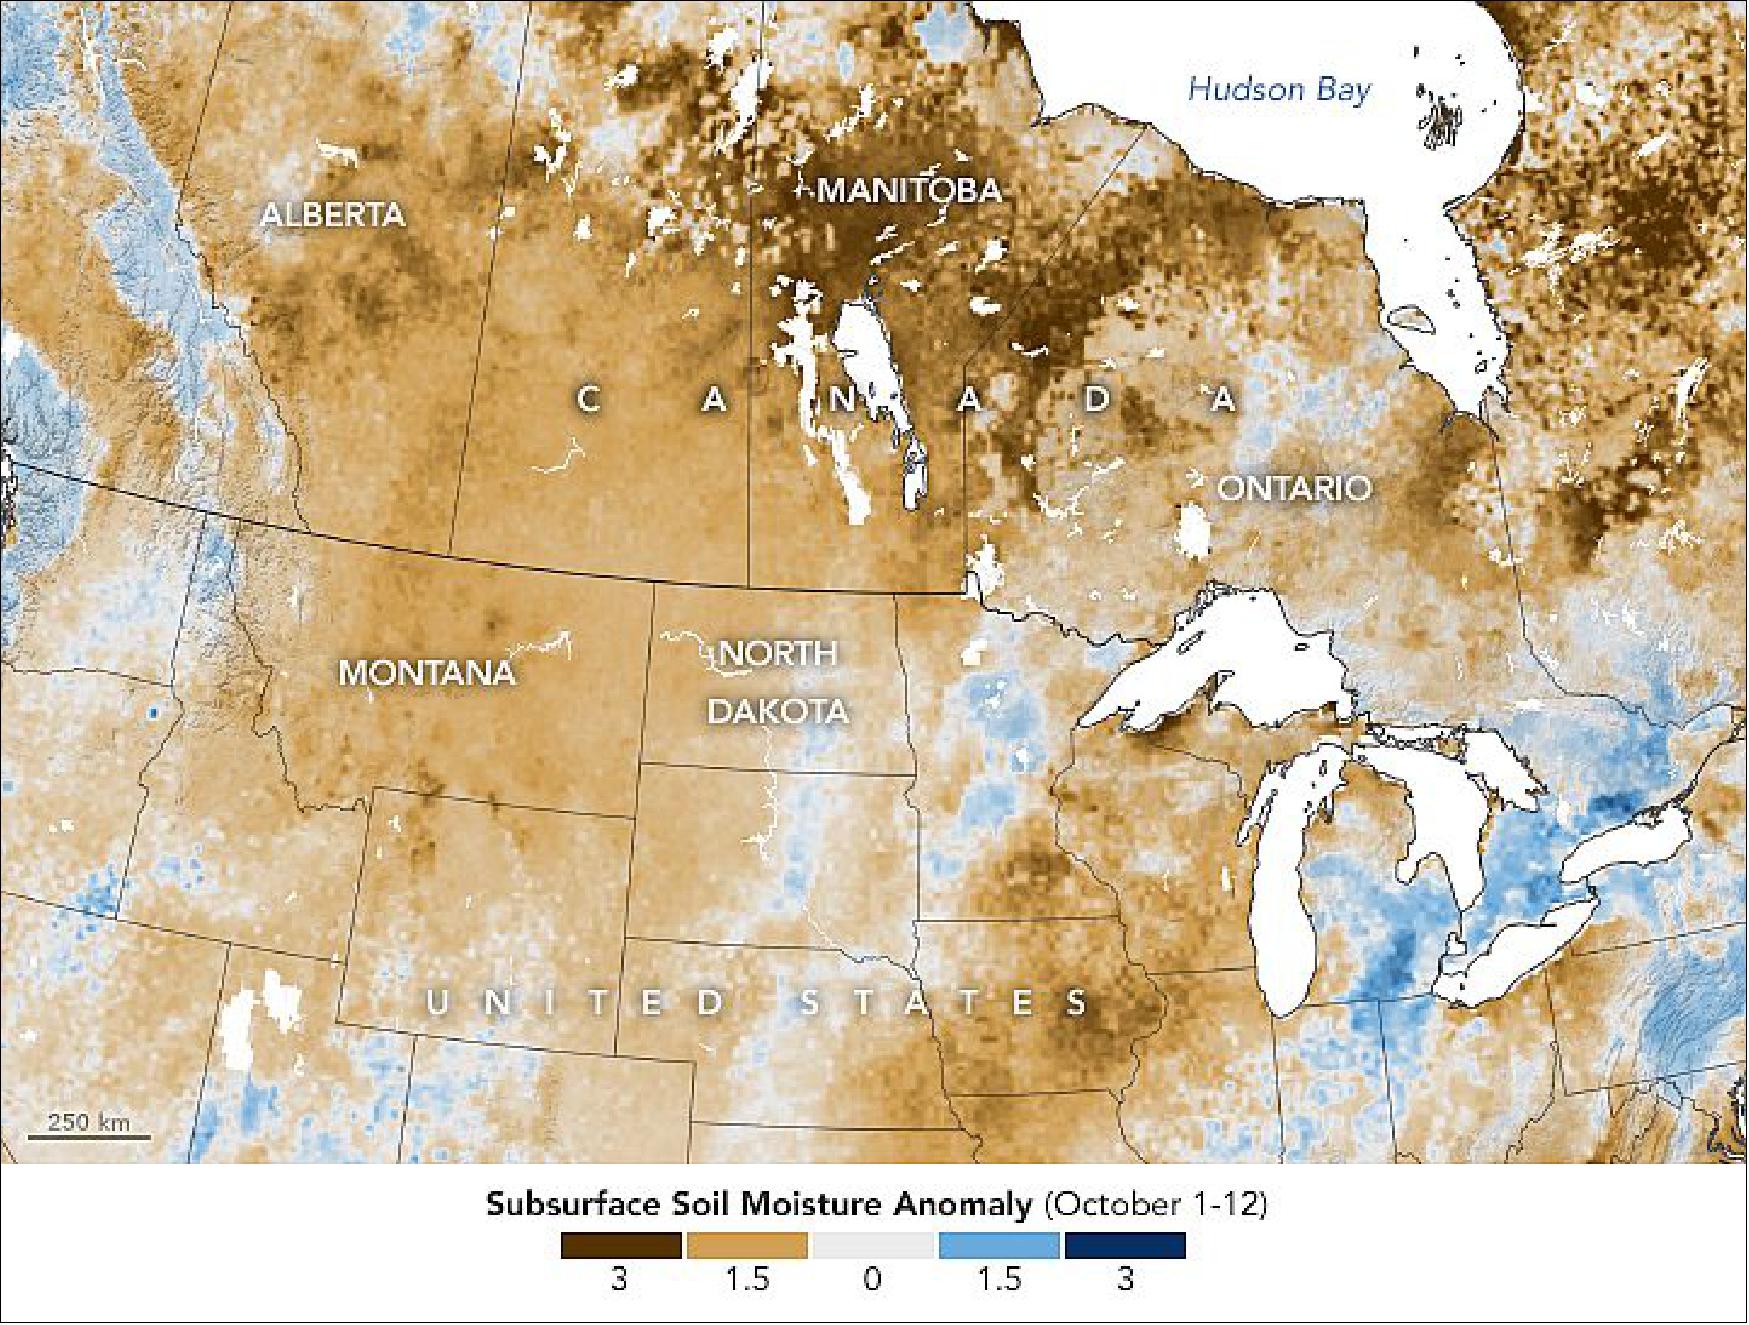 Figure 15: The measurements were derived from data collected by the Soil Moisture Active Passive (SMAP) mission, the first NASA satellite dedicated to measuring the water content of soils. SMAP's radiometer can detect water in the top 5 cm (2 inches) of the ground. Scientists use that surface layer data in a hydrologic model to estimate how much water is present in the root zone (image credit: NASA Earth Observatory images by Lauren Dauphin, using soil moisture data courtesy of JPL and the SMAP Science Team and GRACE data from the National Drought Mitigation Center. Story by Kathryn Hansen with information provided by Mary Mitkish, Keelin Haynes, and Estefania Puricelli/NASA Harvest. NASA Harvest is an applied sciences program with the mission of enabling and advancing the adoption of satellite Earth observations by public and private organizations to benefit food security, agriculture, and human and environmental resiliency in the U.S. and worldwide. This consortium of scientists and agricultural stakeholders is led by the University of Maryland)